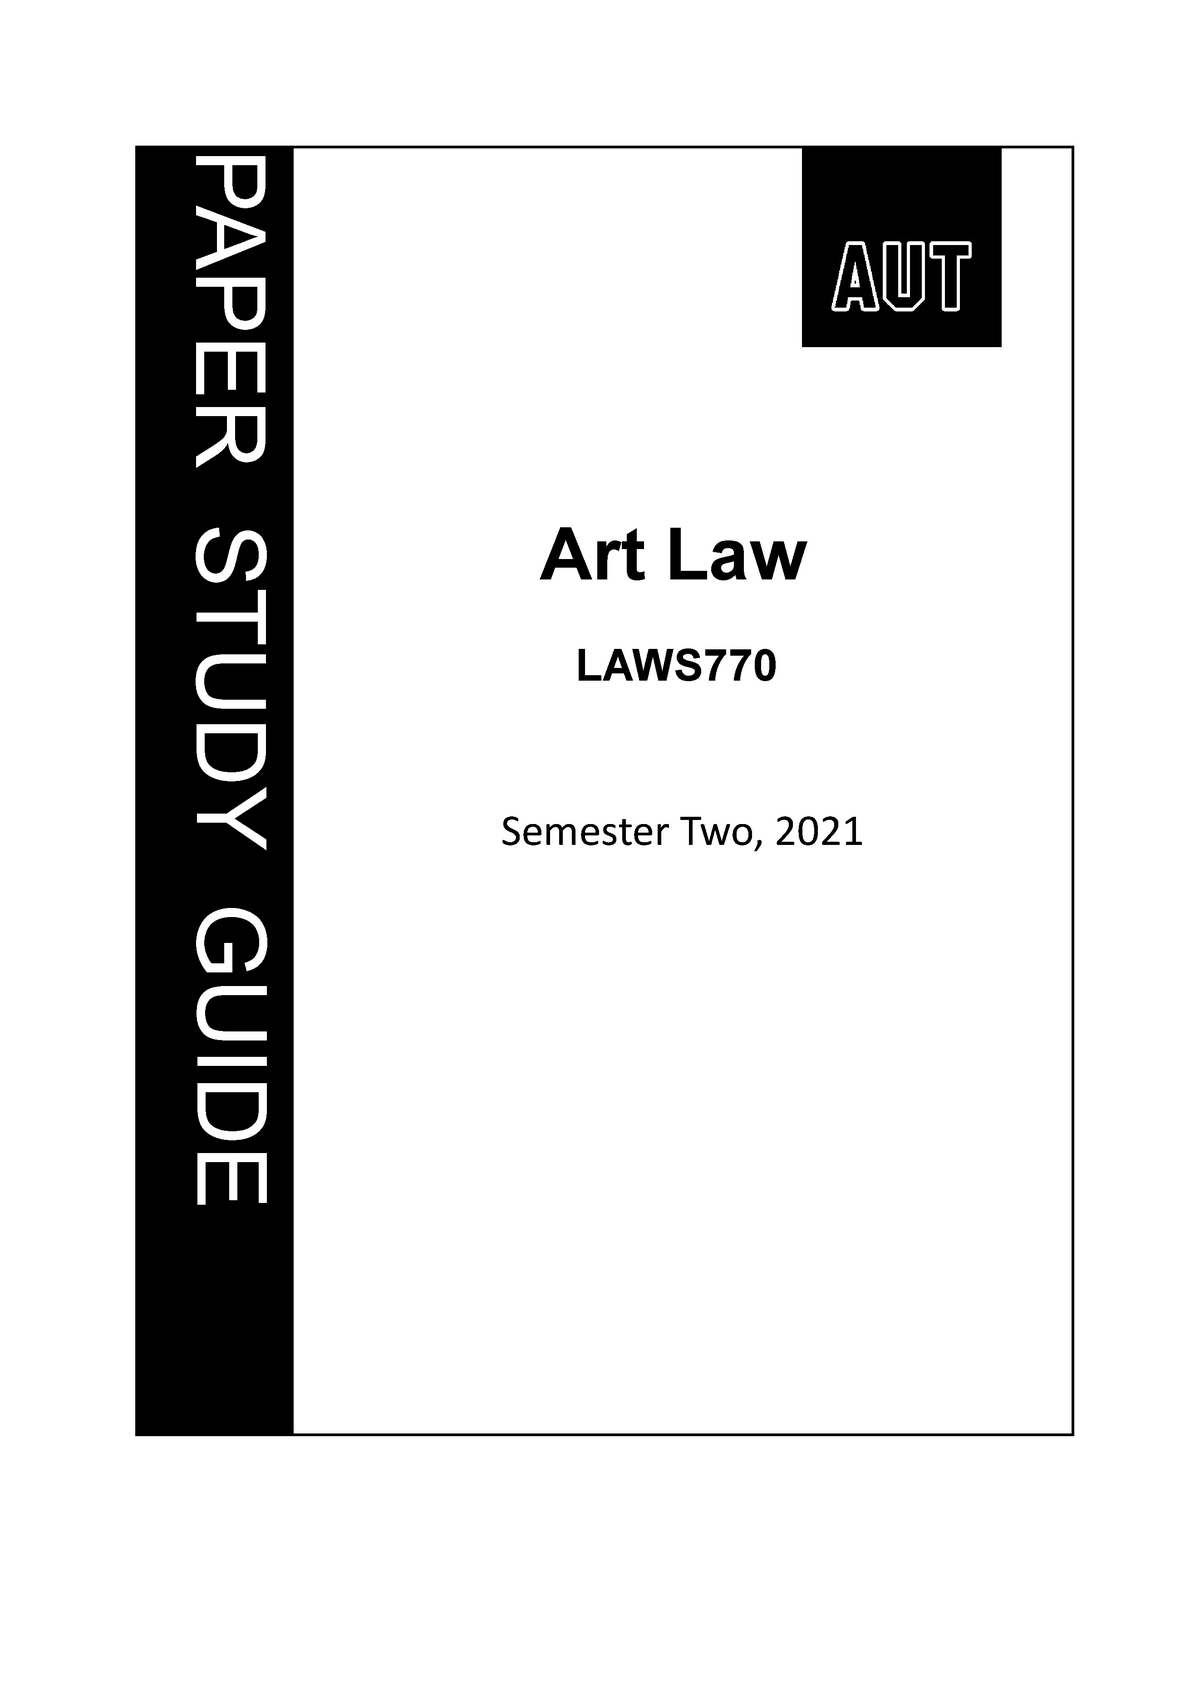 Art Law study guide 2021 Final Art Law LAWS Semester Two, 2021 P A P